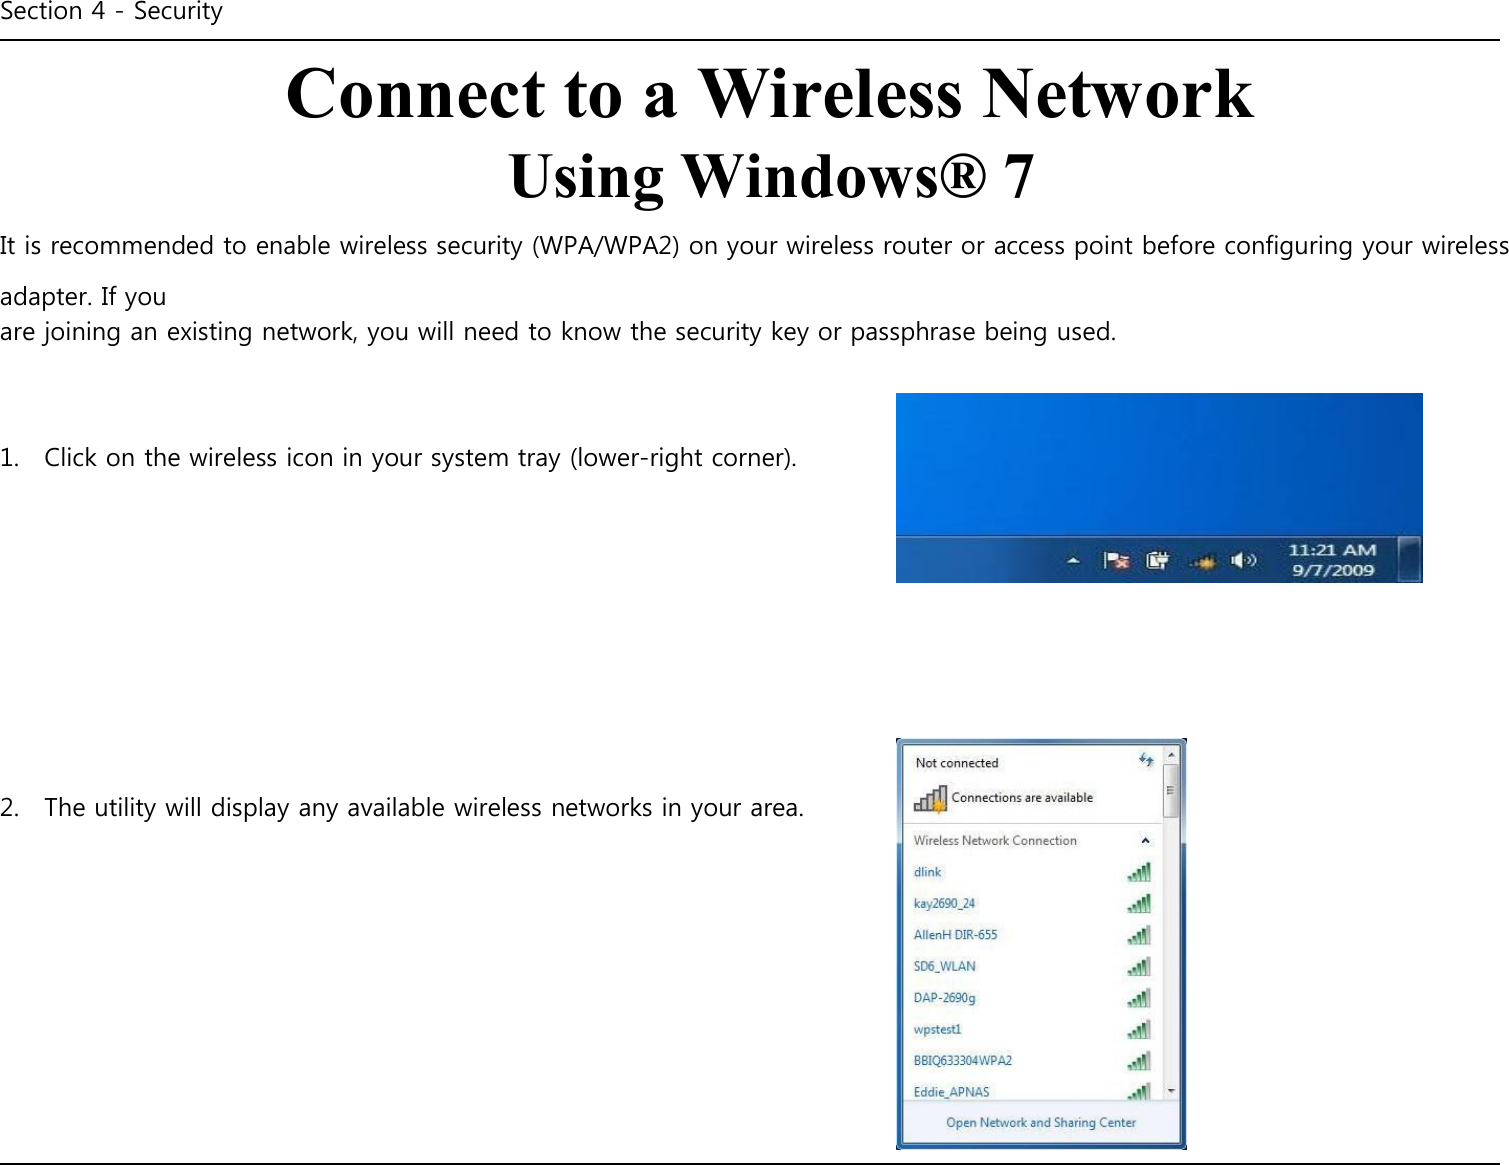 Section 4 - Security    Connect to a Wireless Network Using Windows® 7 It is recommended to enable wireless security (WPA/WPA2) on your wireless router or access point before configuring your wireless adapter. If you are joining an existing network, you will need to know the security key or passphrase being used.     1.    Click on the wireless icon in your system tray (lower-right corner).               2.    The utility will display any available wireless networks in your area.                   